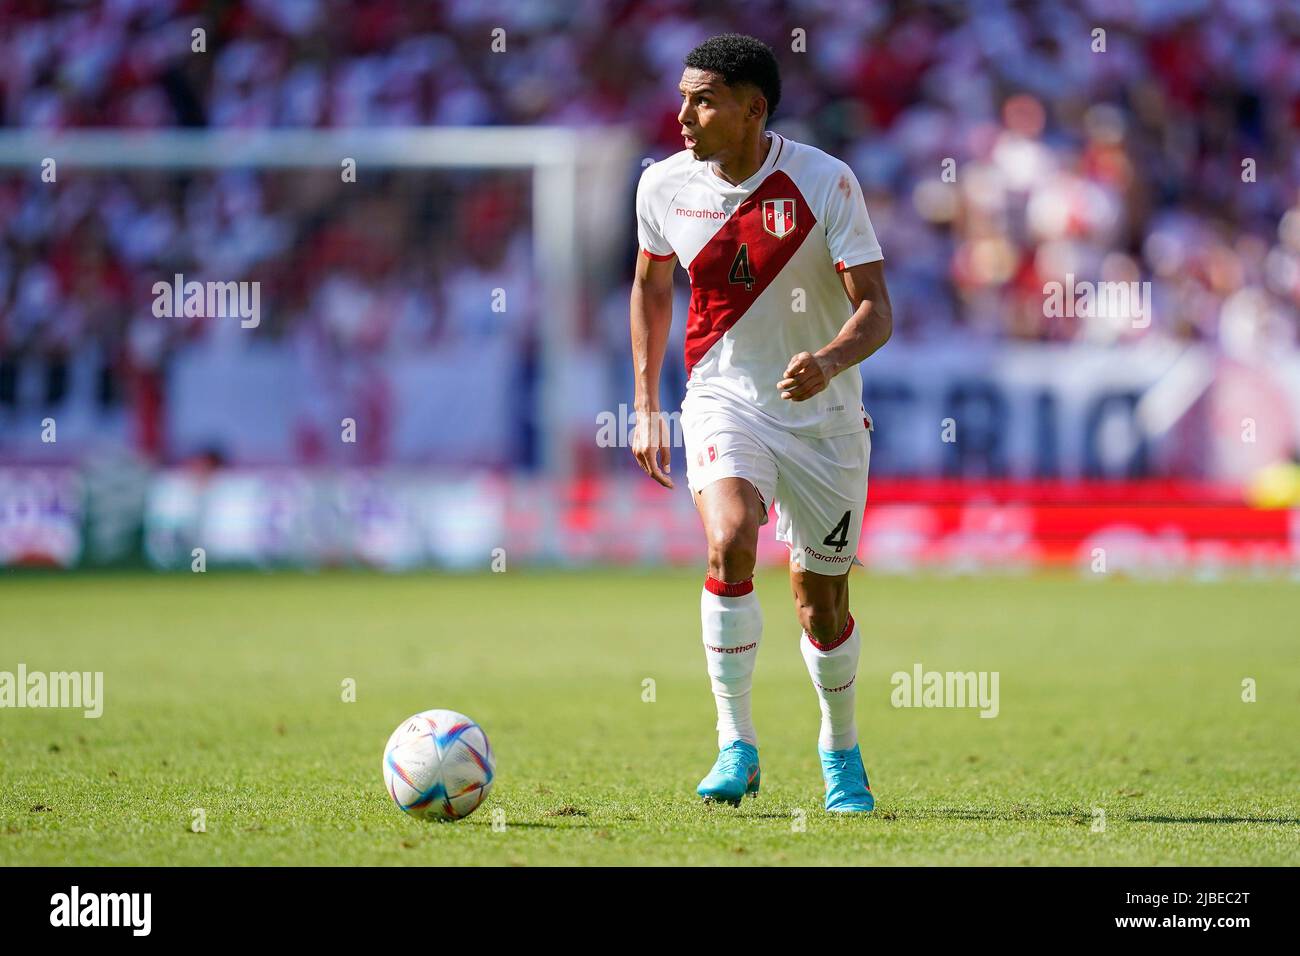 Barcelona, Spain. June 5, 2022, Marcos Lopez of Peru during the friendly match between Peru and New Zealand played at RCDE Stadium on June 5, 2022 in Barcelona, Spain. (Photo by Bagu Blanco / PRESSINPHOTO) Stock Photo